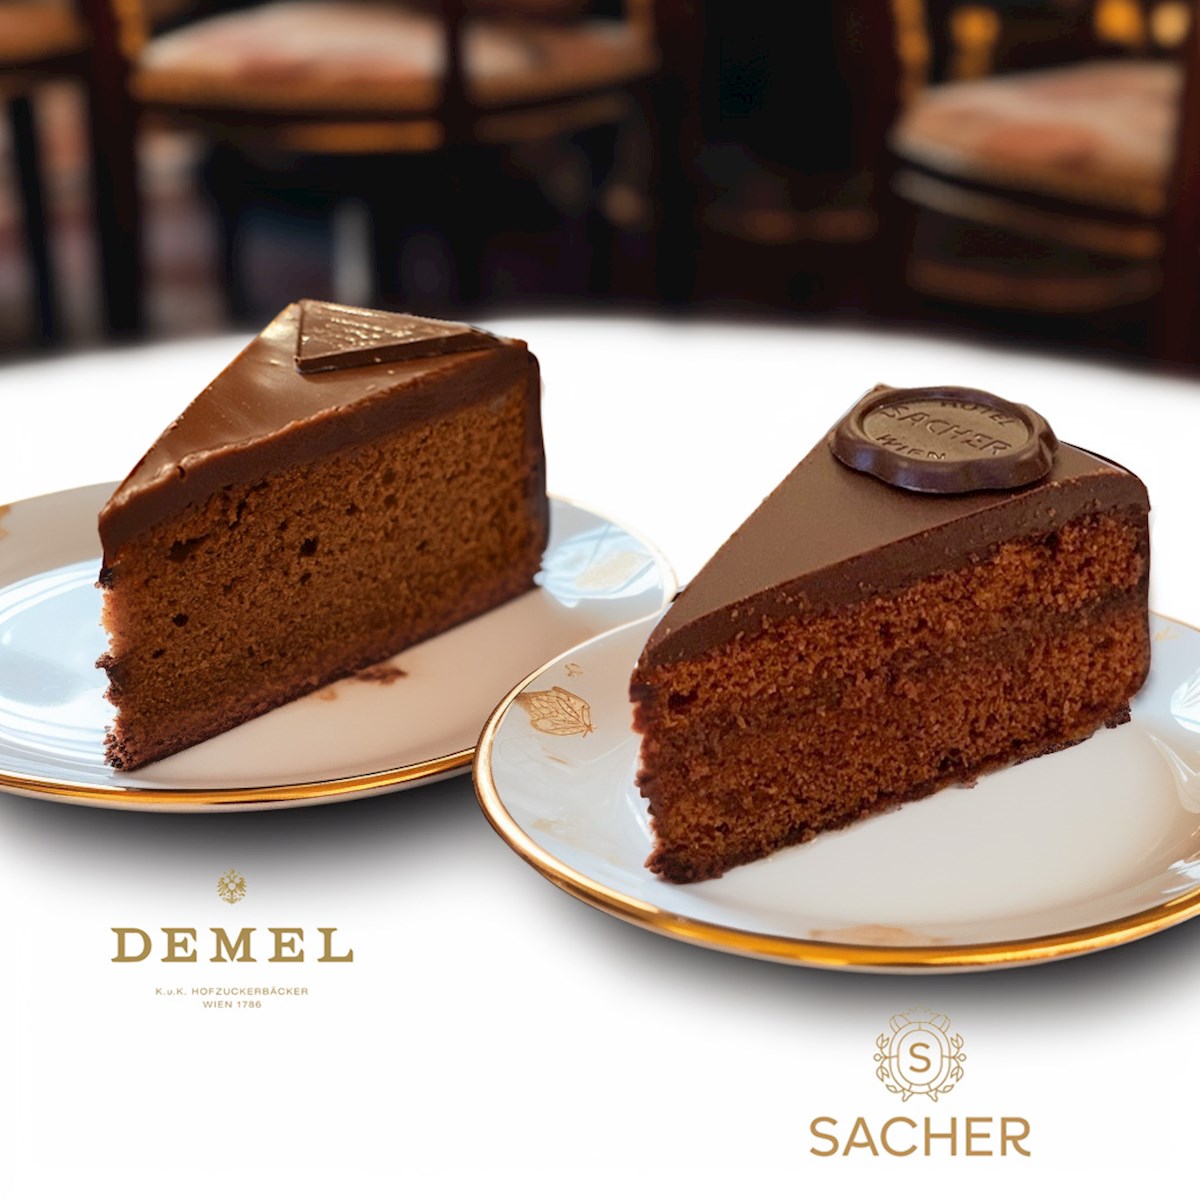 The century-long cake war: Demel vs. Sacher and the fight for